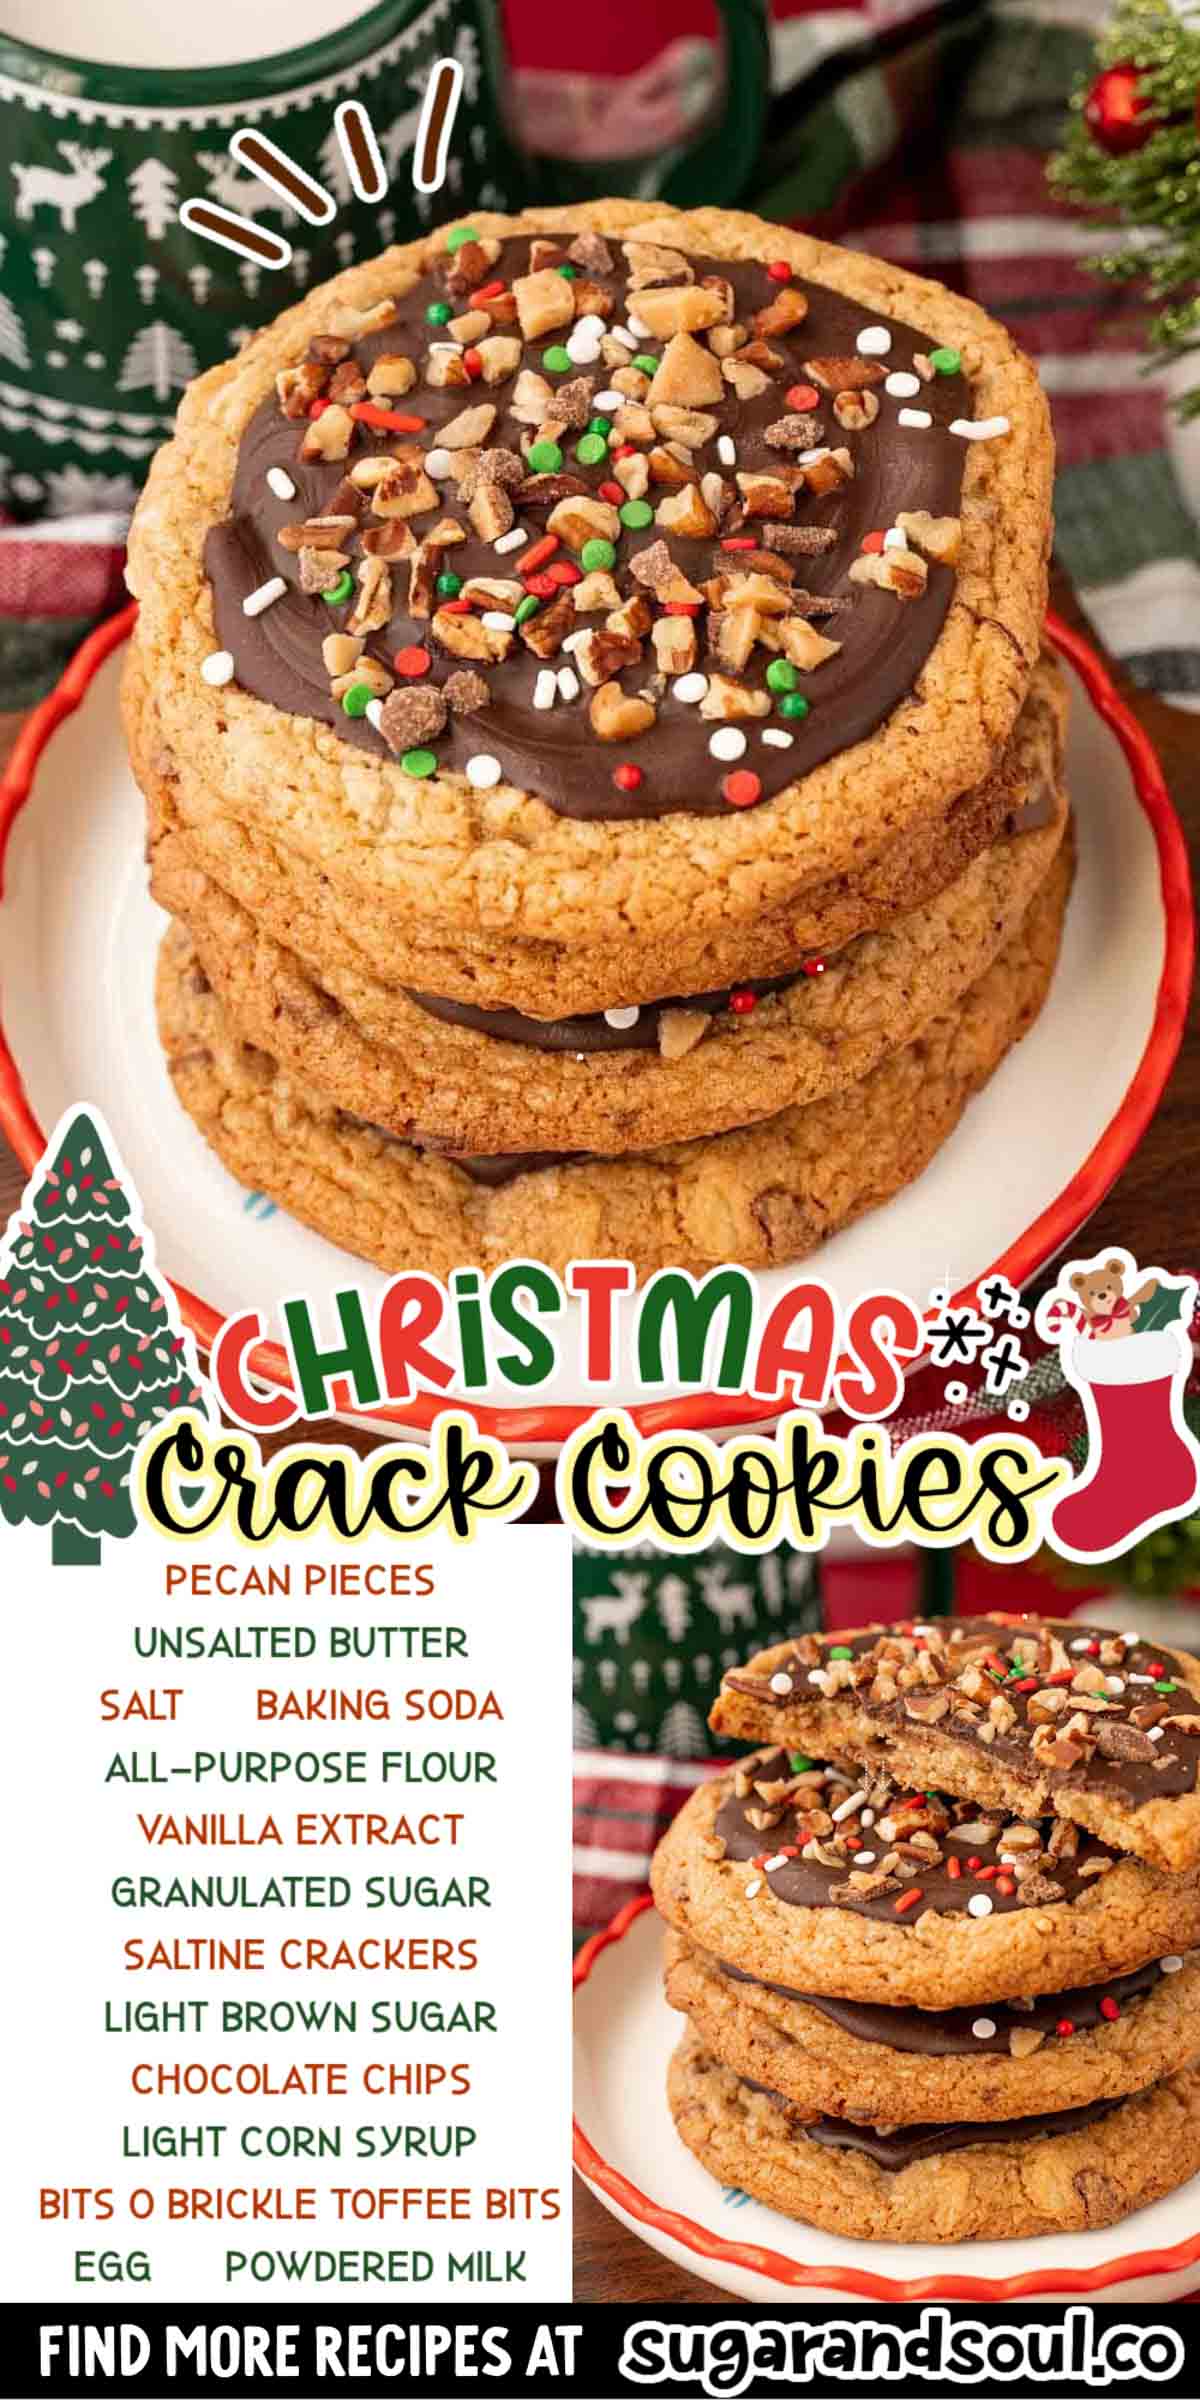 Christmas Crack Cookies are a tasty twist on the holiday favorite that's made with chocolate chip cookies with saltine crackers mixed into them! Topped with melted chocolate, toffee, toasted pecans, and sprinkles! via @sugarandsoulco